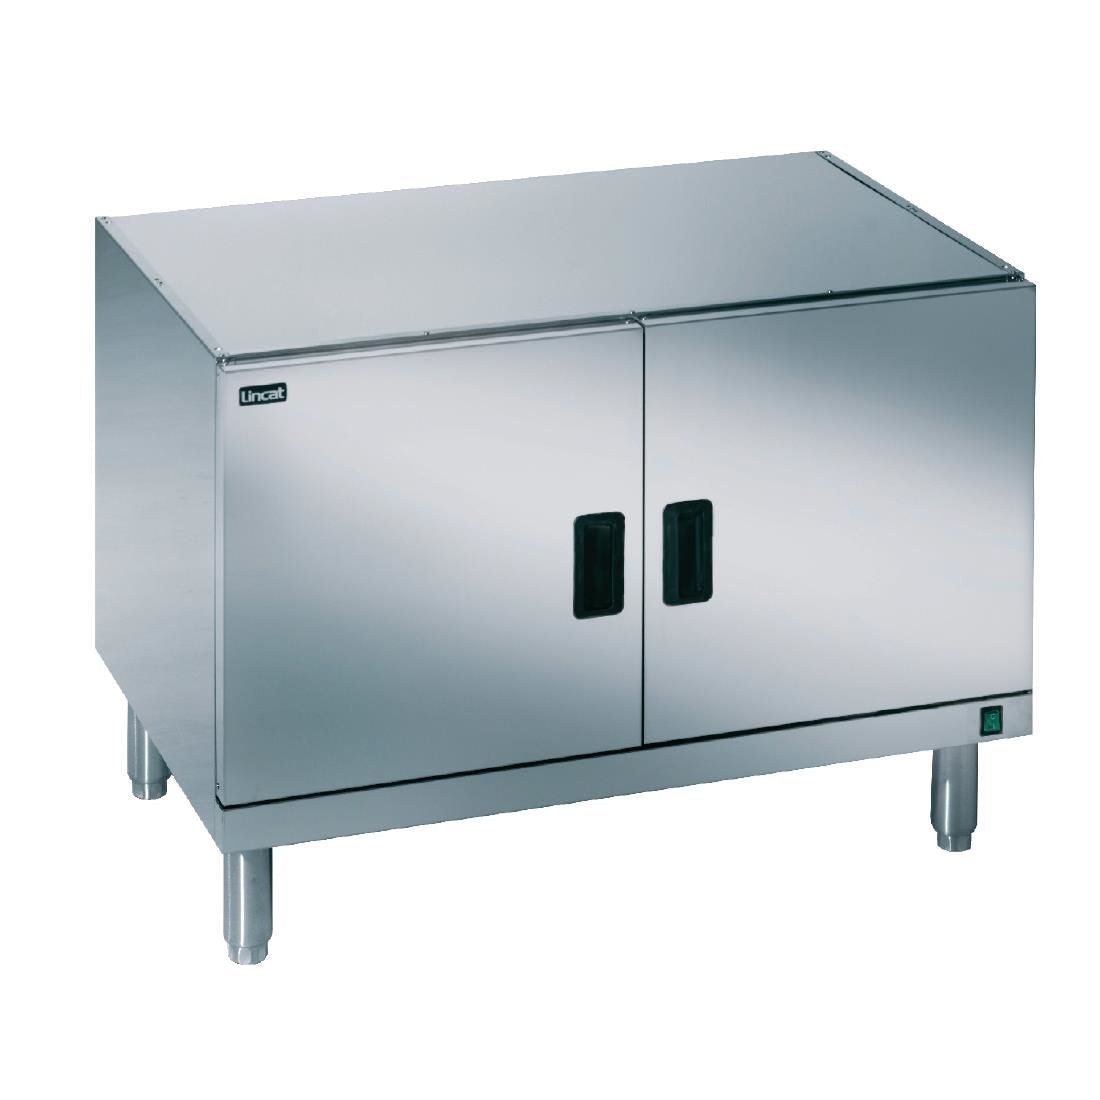 E405 Lincat Silverlink 600 Heated Pedestal With Top, Legs and Doors HCL9 JD Catering Equipment Solutions Ltd